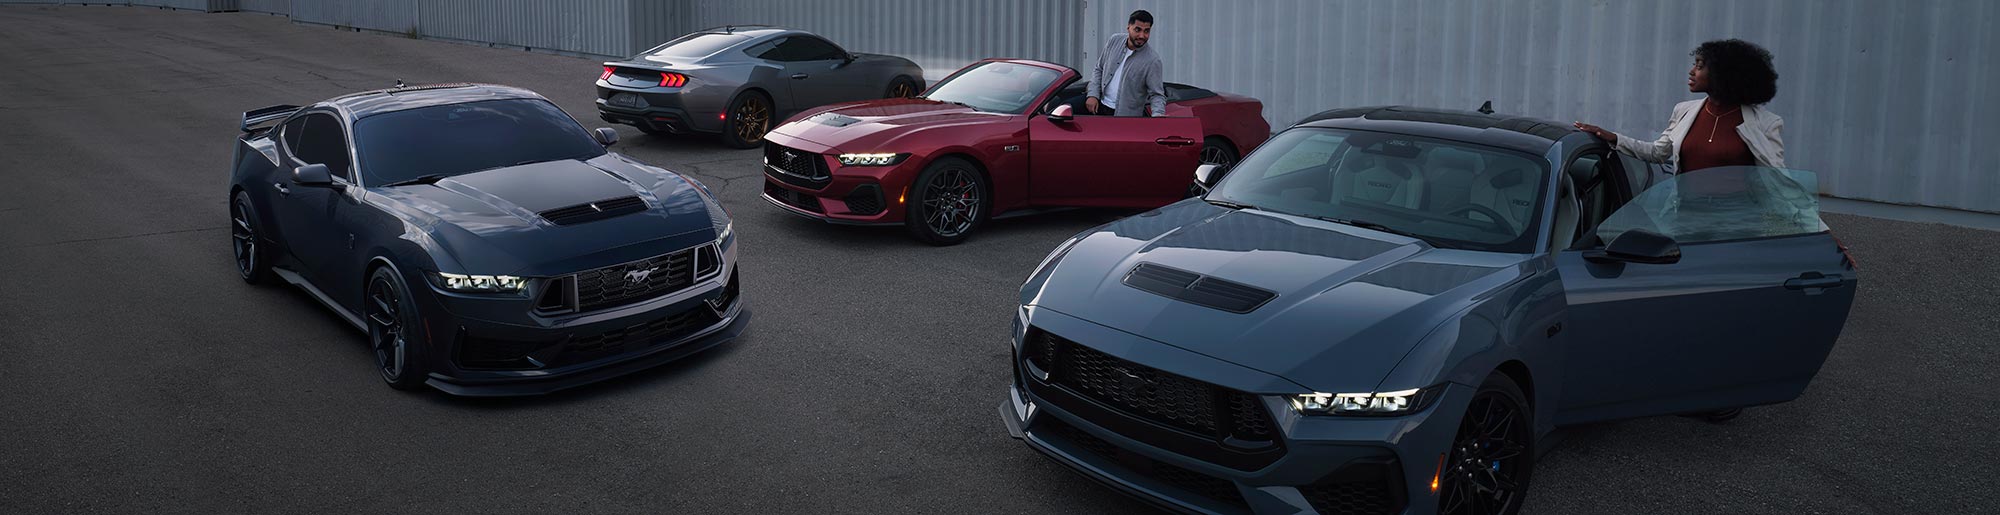 Video: Need For Speed Mustang Drifts Around Office Park - FordMuscle